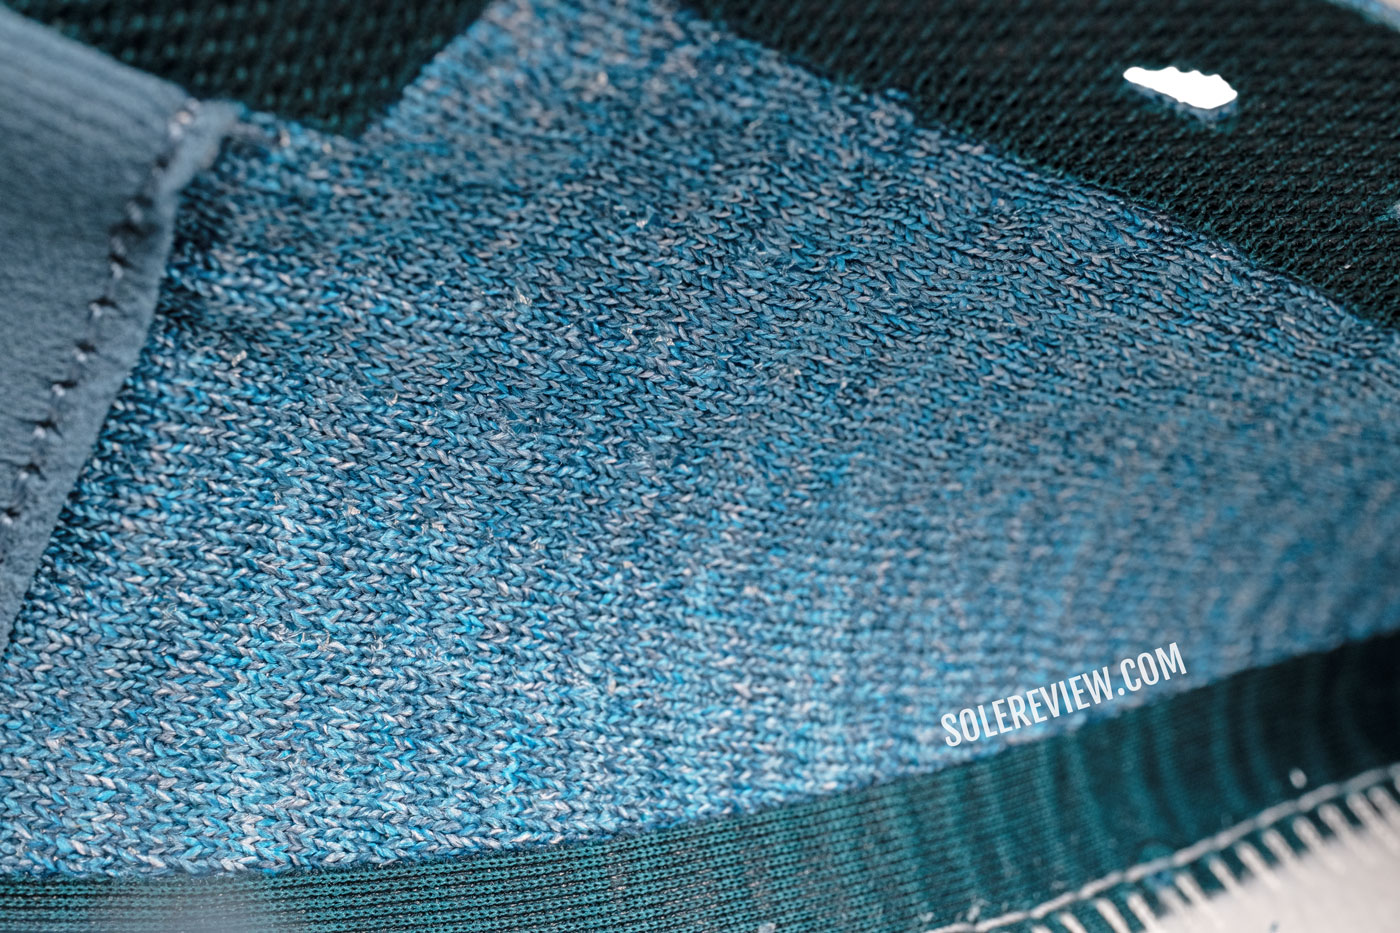 The inner lining of the Nike Invincible Run 3.